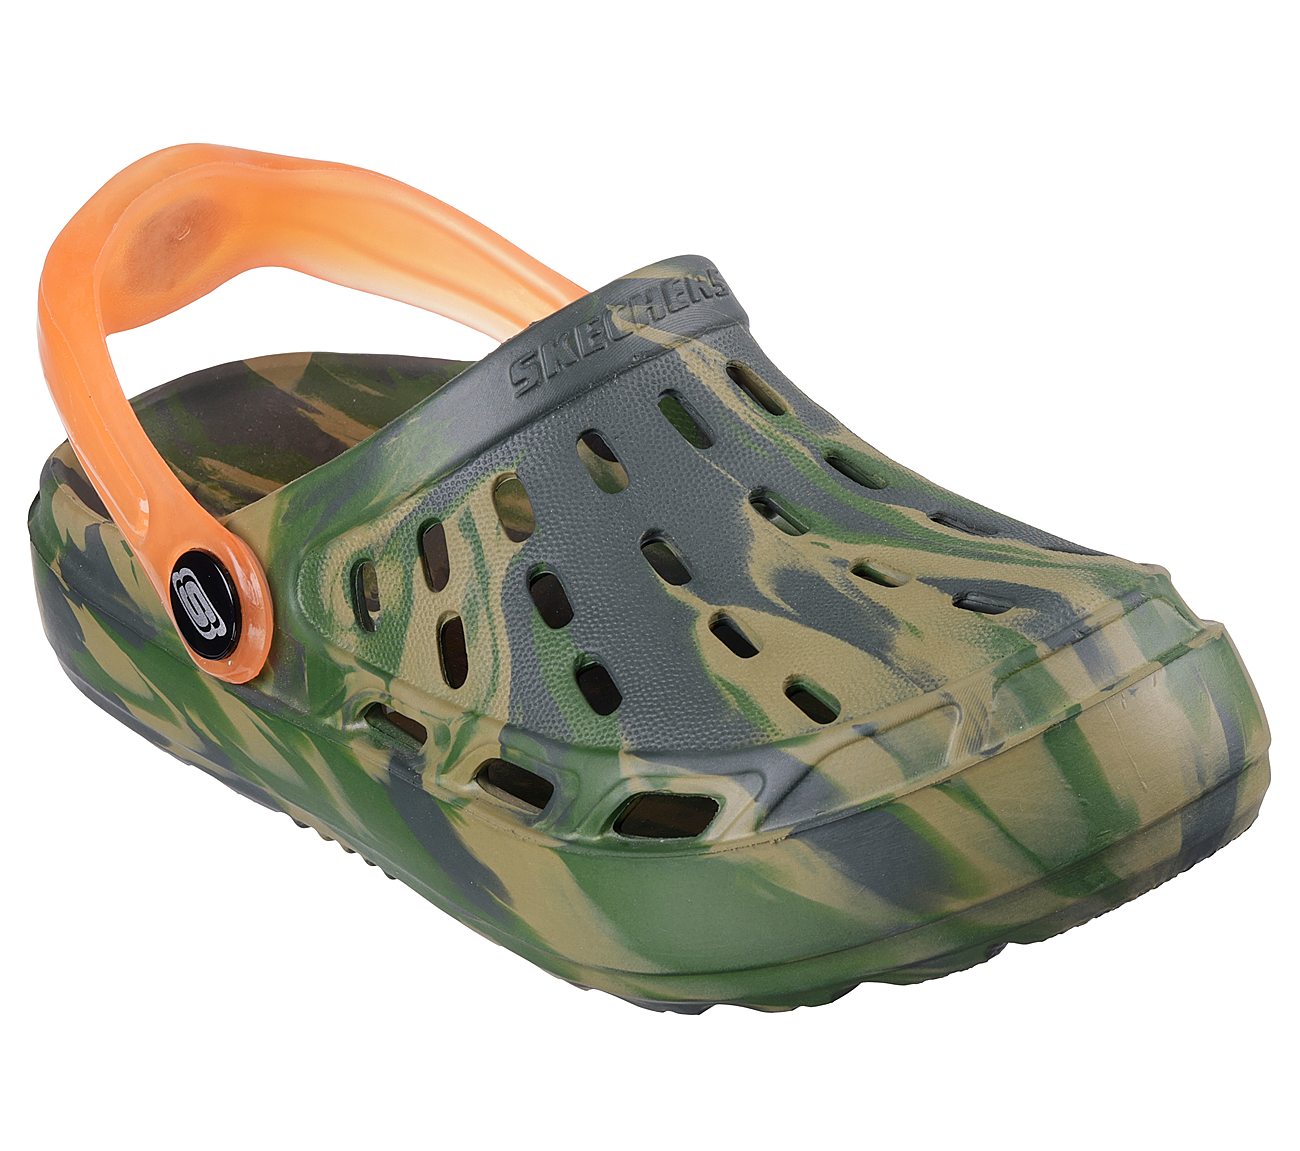 SWIFTERS-TRANSLUMINATOR, CAMOUFLAGE Footwear Right View